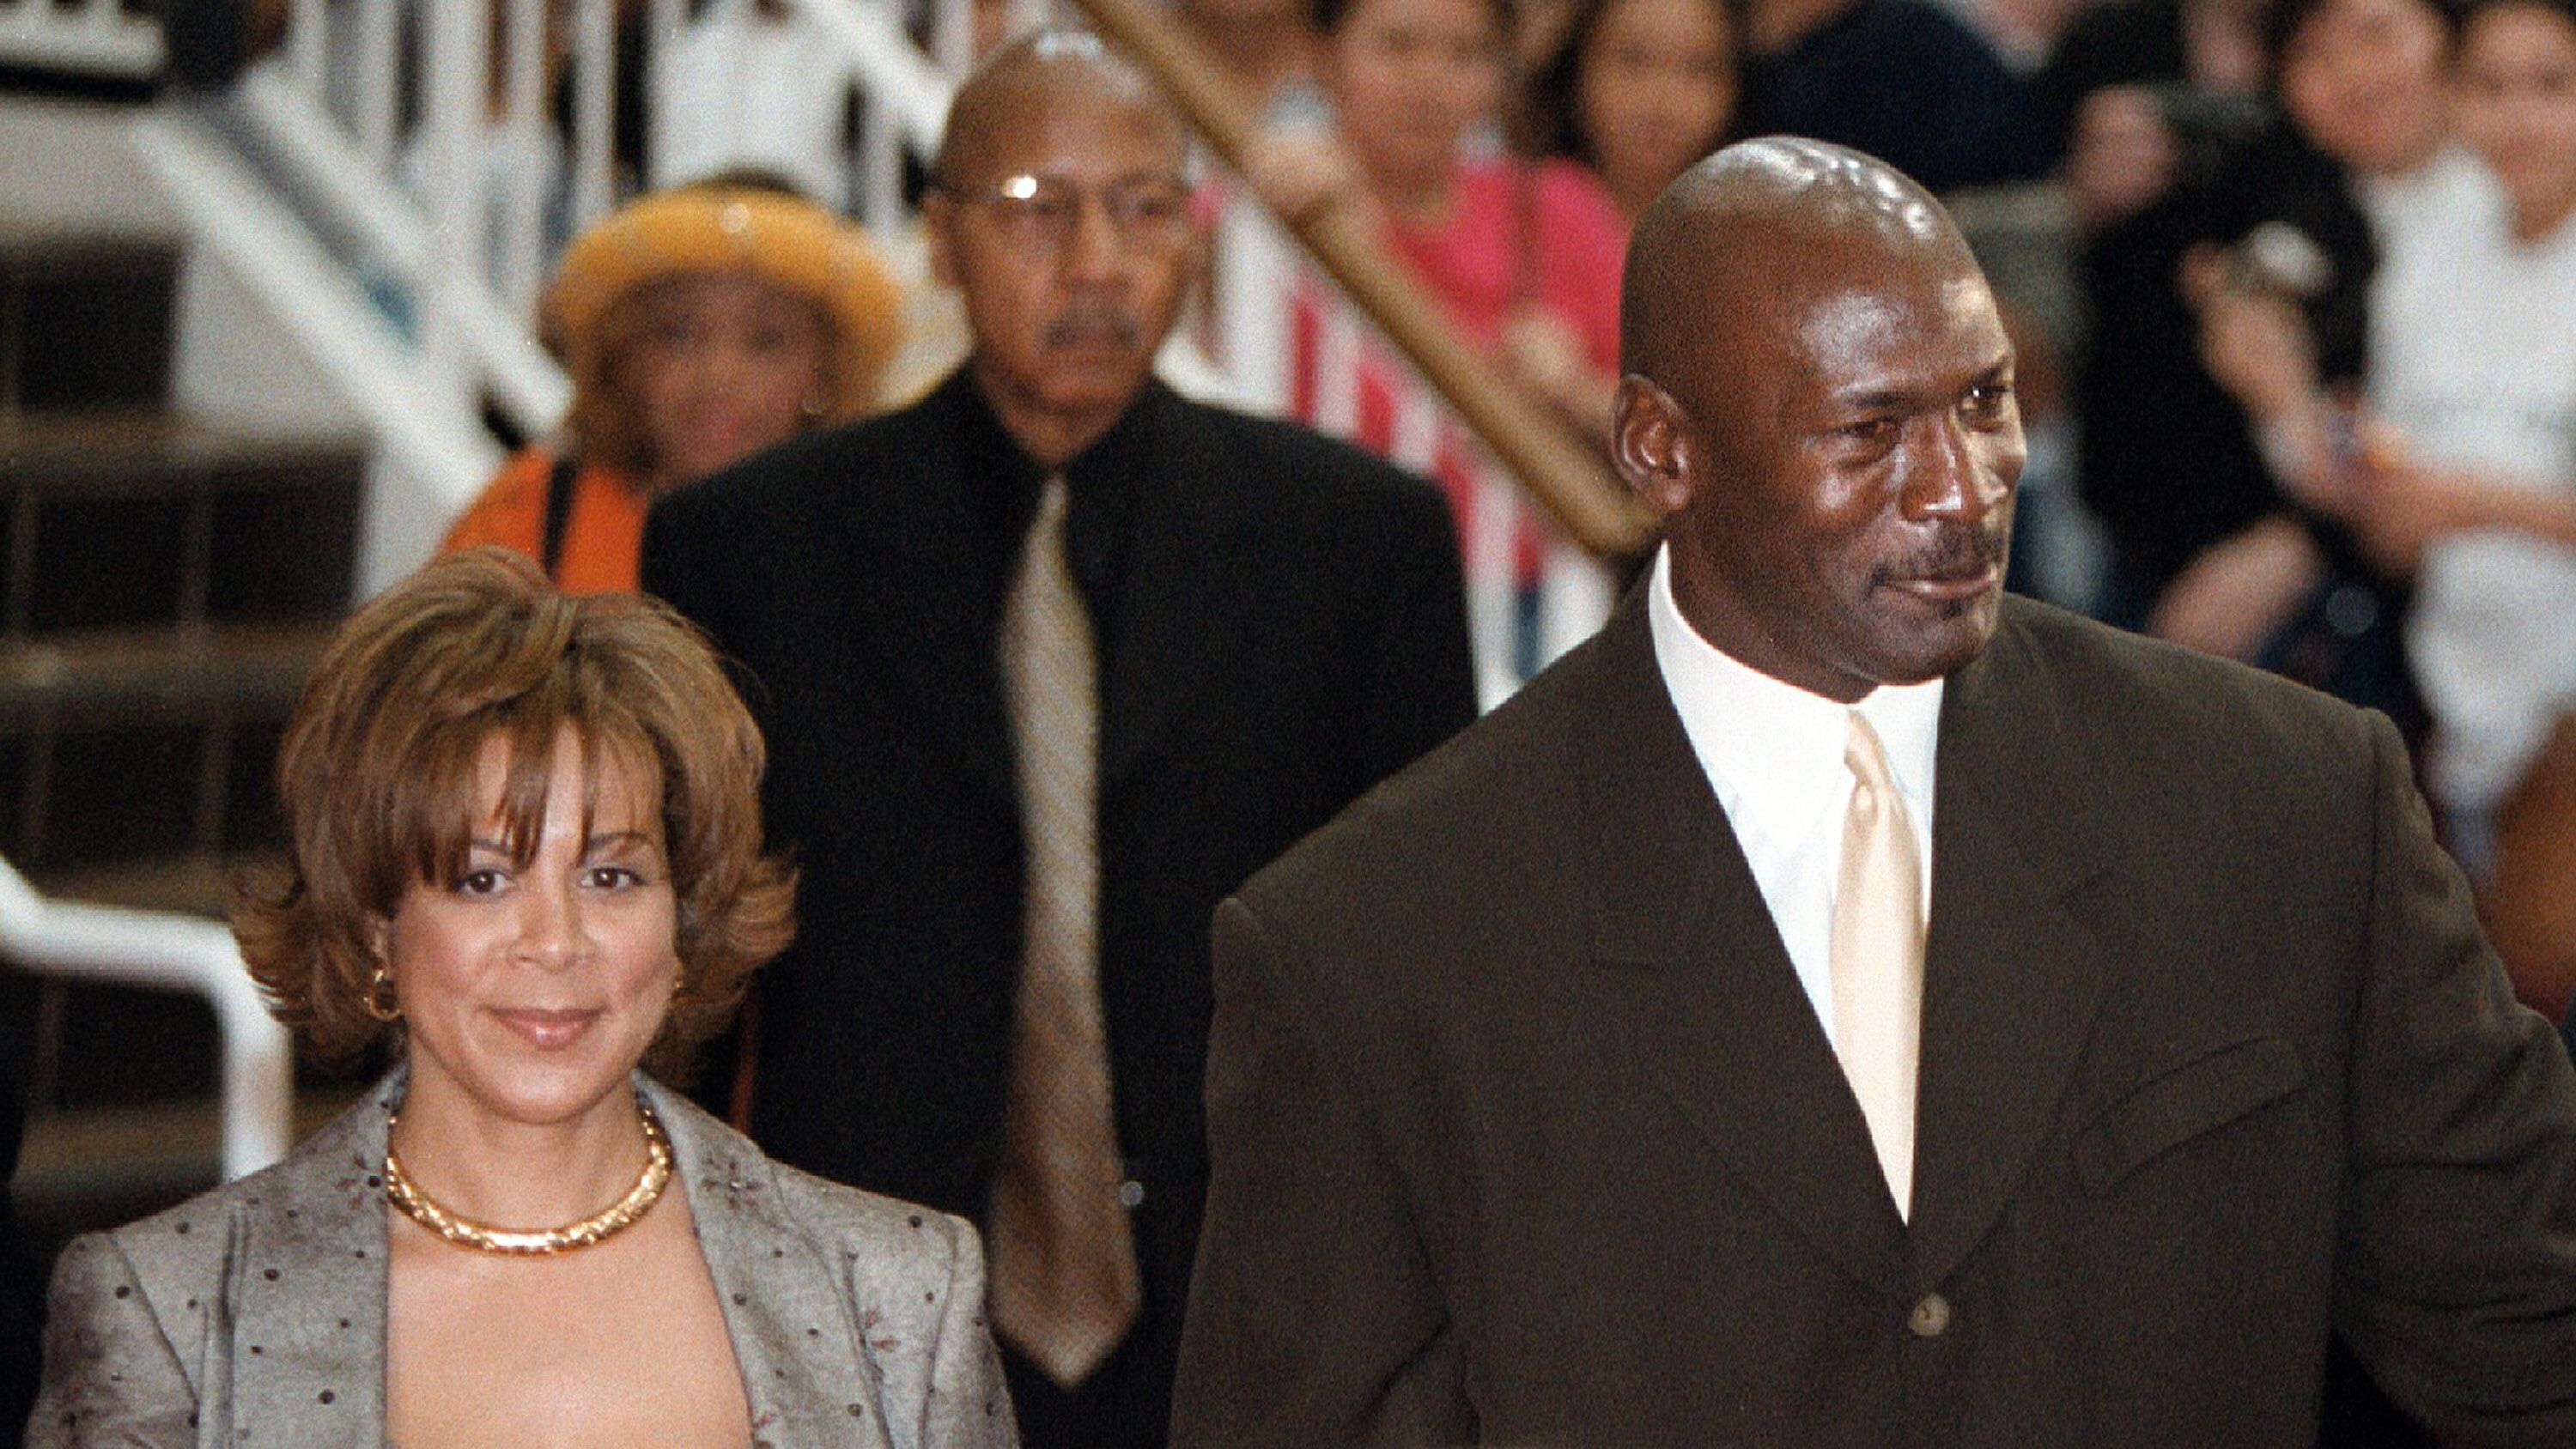 Michael Jordan and his wife Juanita arrive for the world premier of the IMAX movie "Michael Jordan To The Max." | Source: Getty Images 